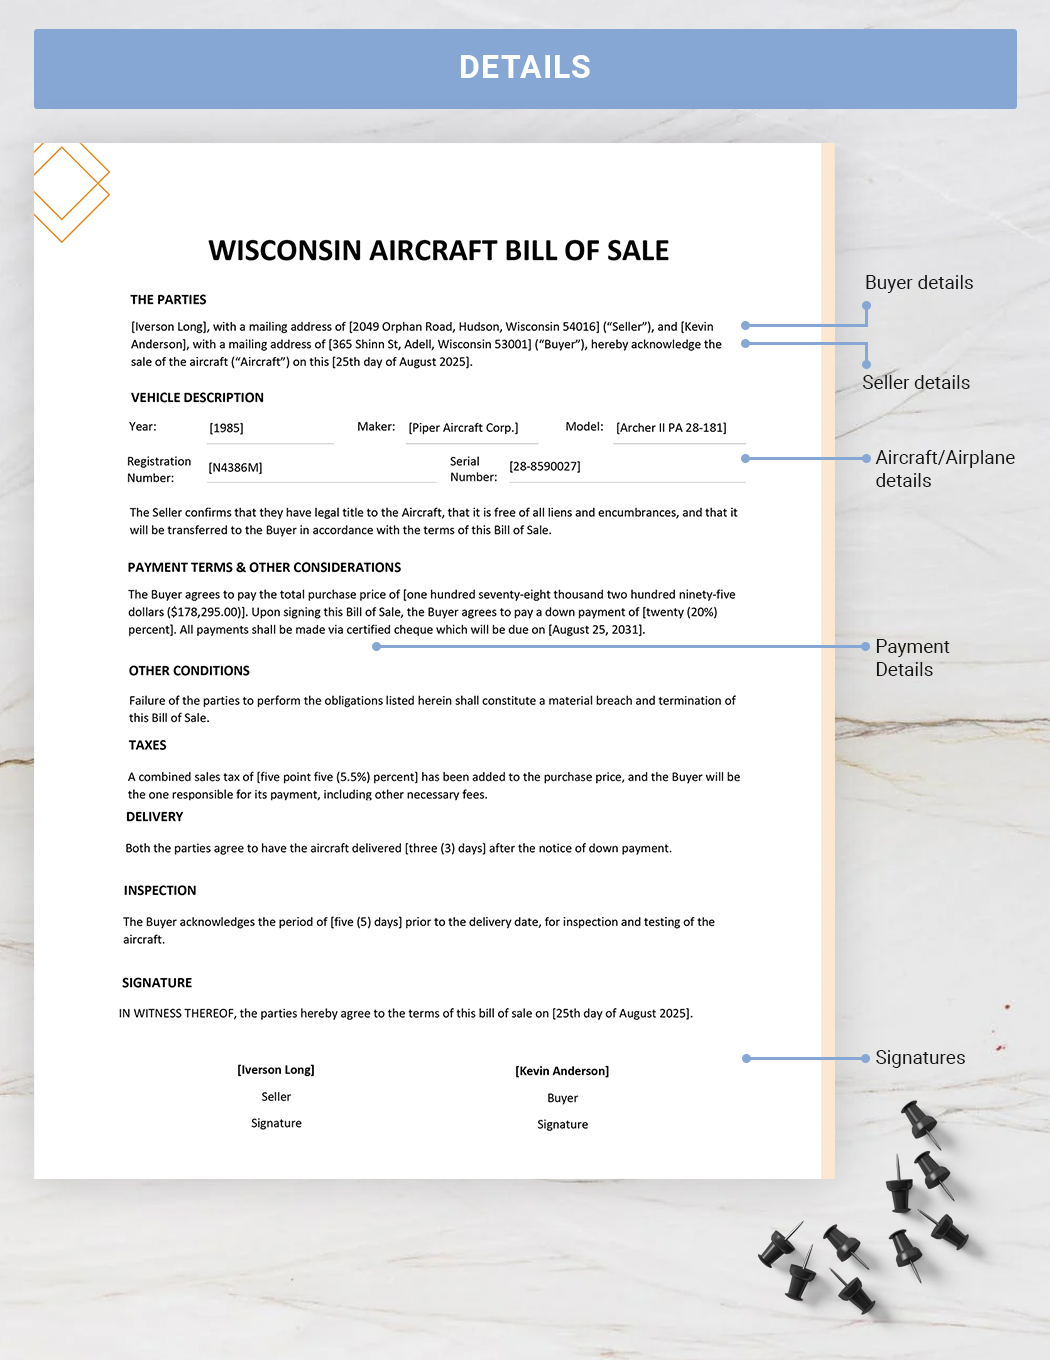 Wisconsin Aircraft / Airplane Bill of Sale Template